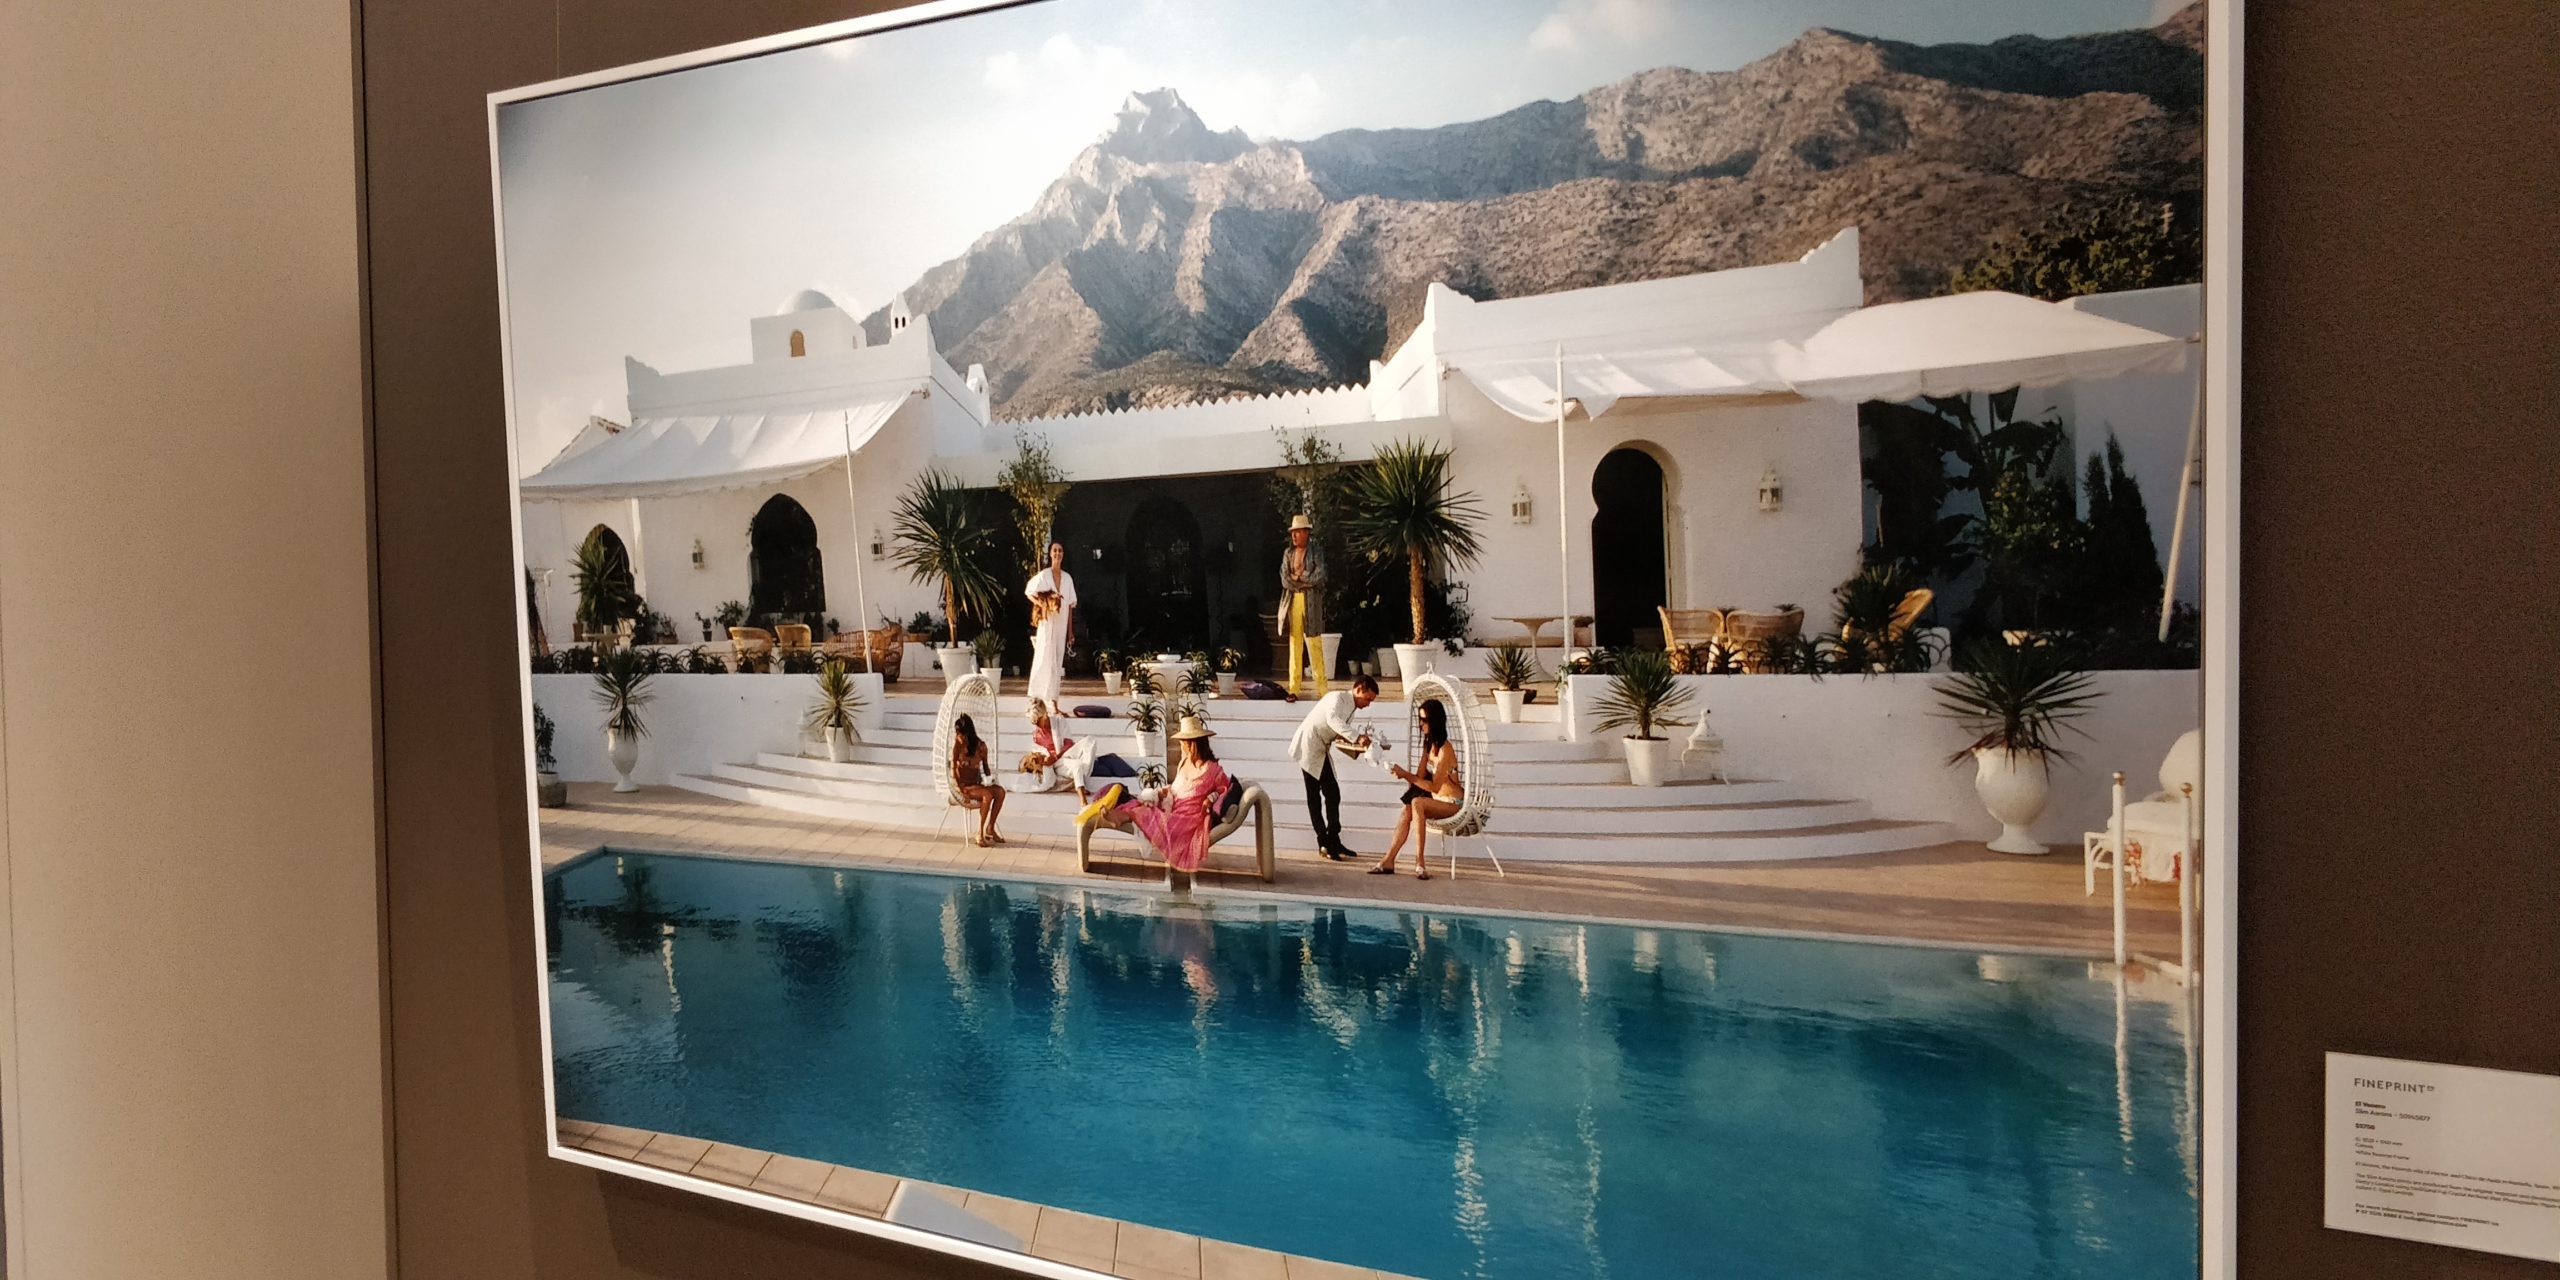 Review the Grand Mirage Resort picture of a Slim Aaron's picture 